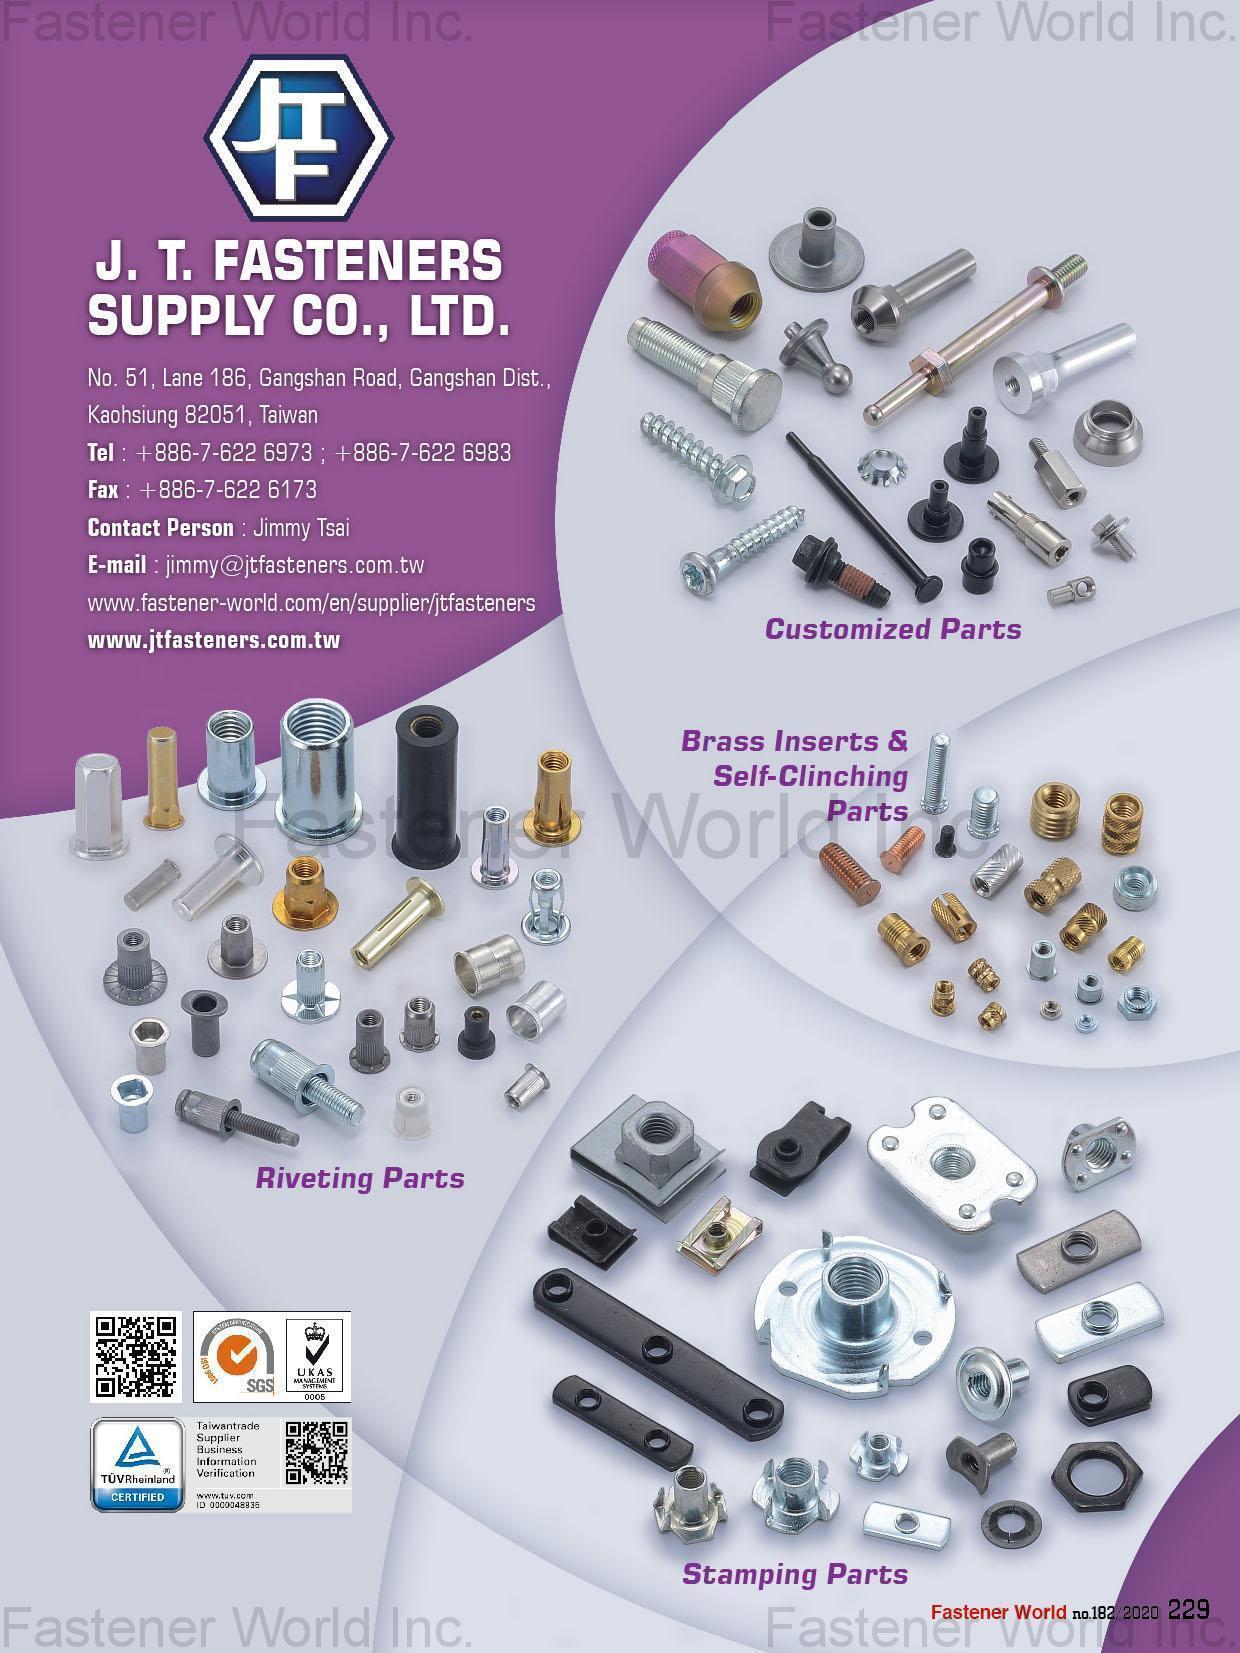 J. T. FASTENERS SUPPLY CO., LTD.  , 2019 DM,Riveting Parts, Stamping Parts, Customized Parts, Brass Inserts & Self-Clinching Parts